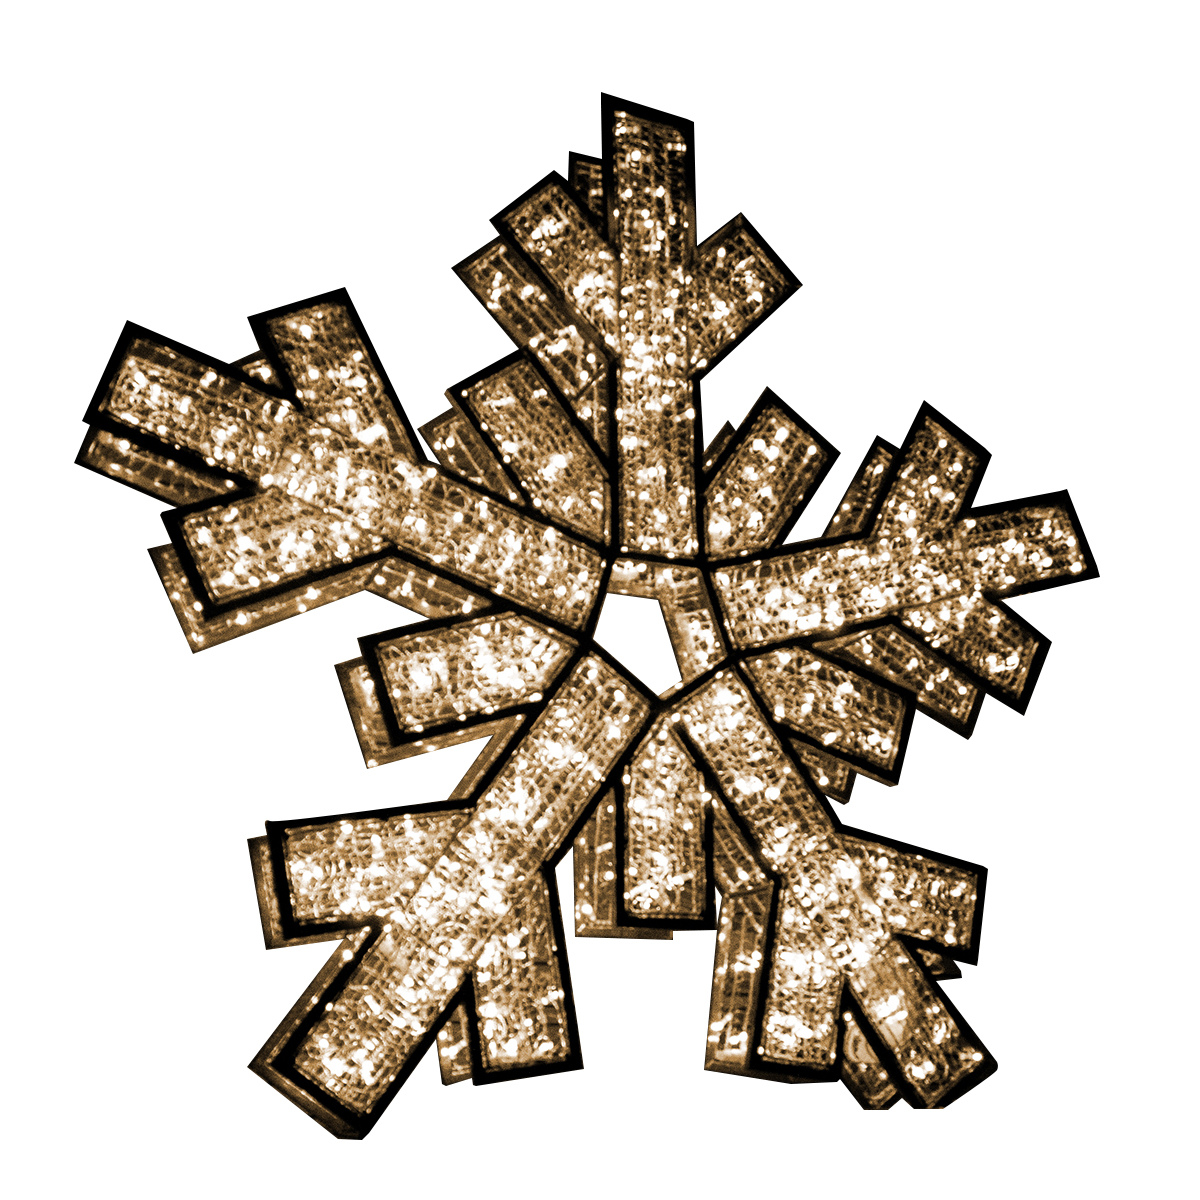 3D Gold 2-Sided Snowflake - Christmas Display - Warm White LED Lights - Large - 9.8ft tall